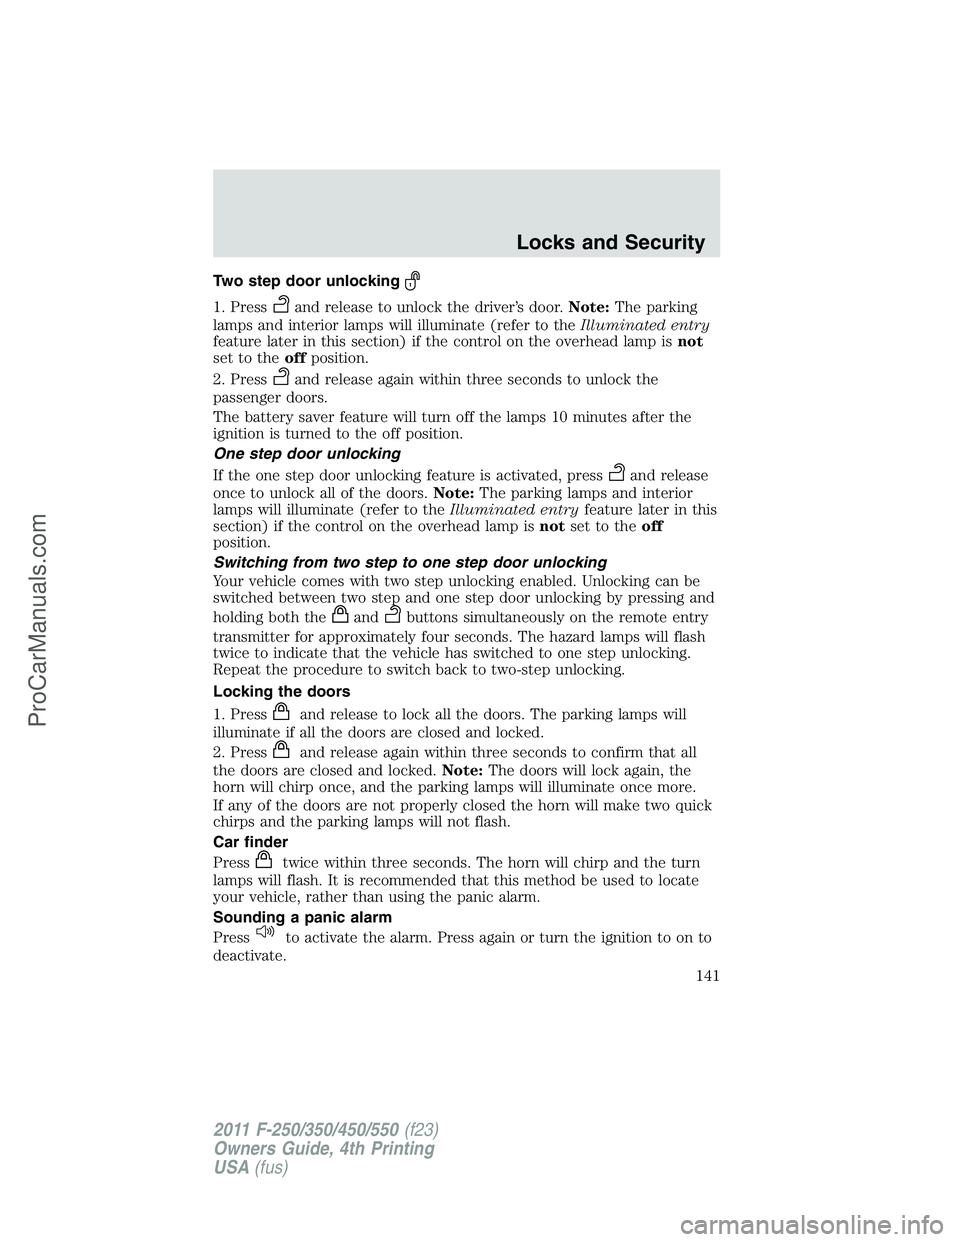 FORD F350 2011  Owners Manual Two step door unlocking
1. Pressand release to unlock the driver’s door.Note:The parking
lamps and interior lamps will illuminate (refer to theIlluminated entry
feature later in this section) if the